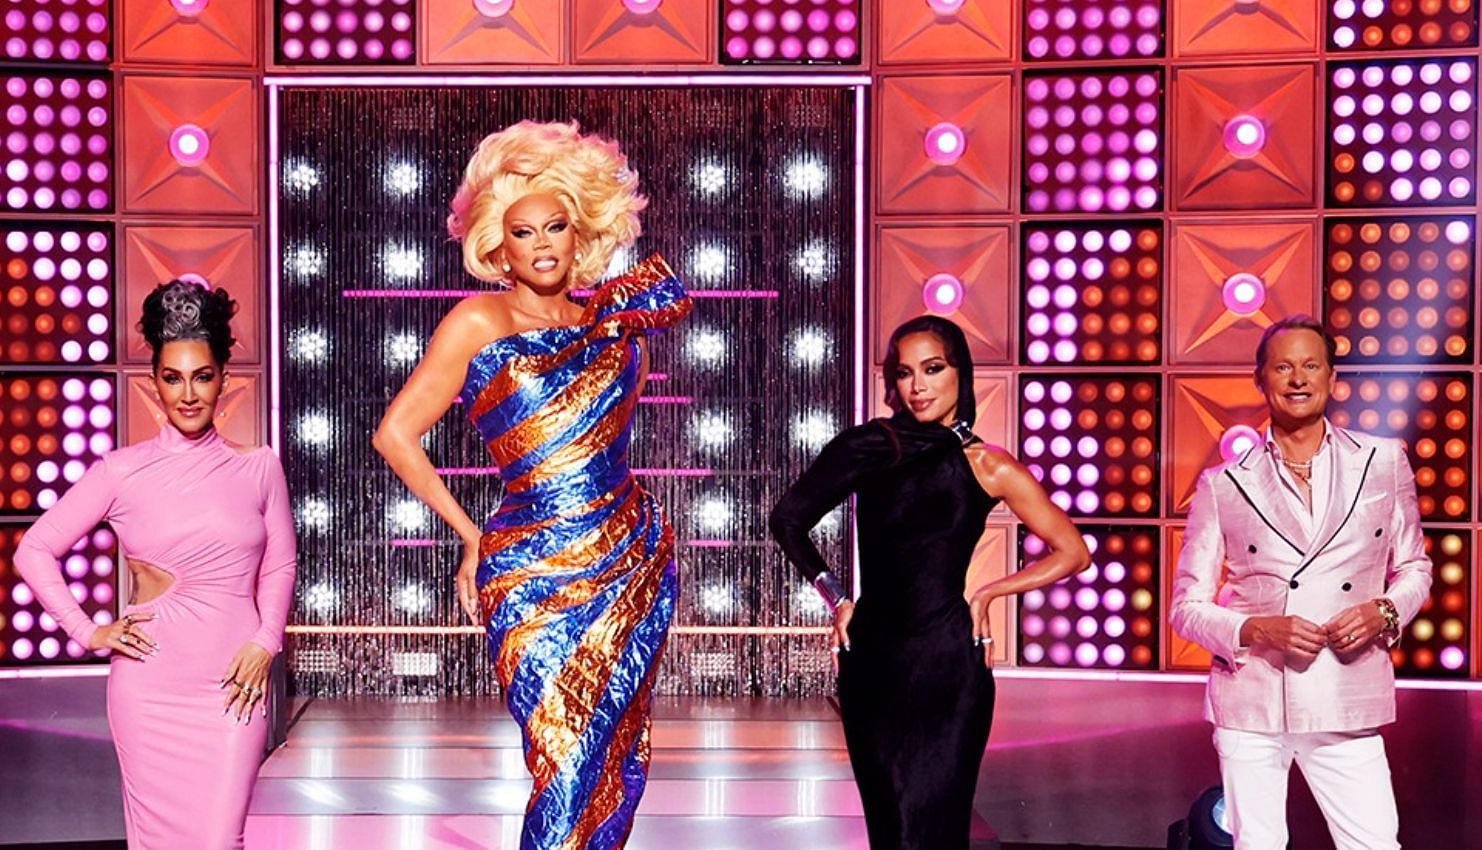 An image from the cast of RuPaul